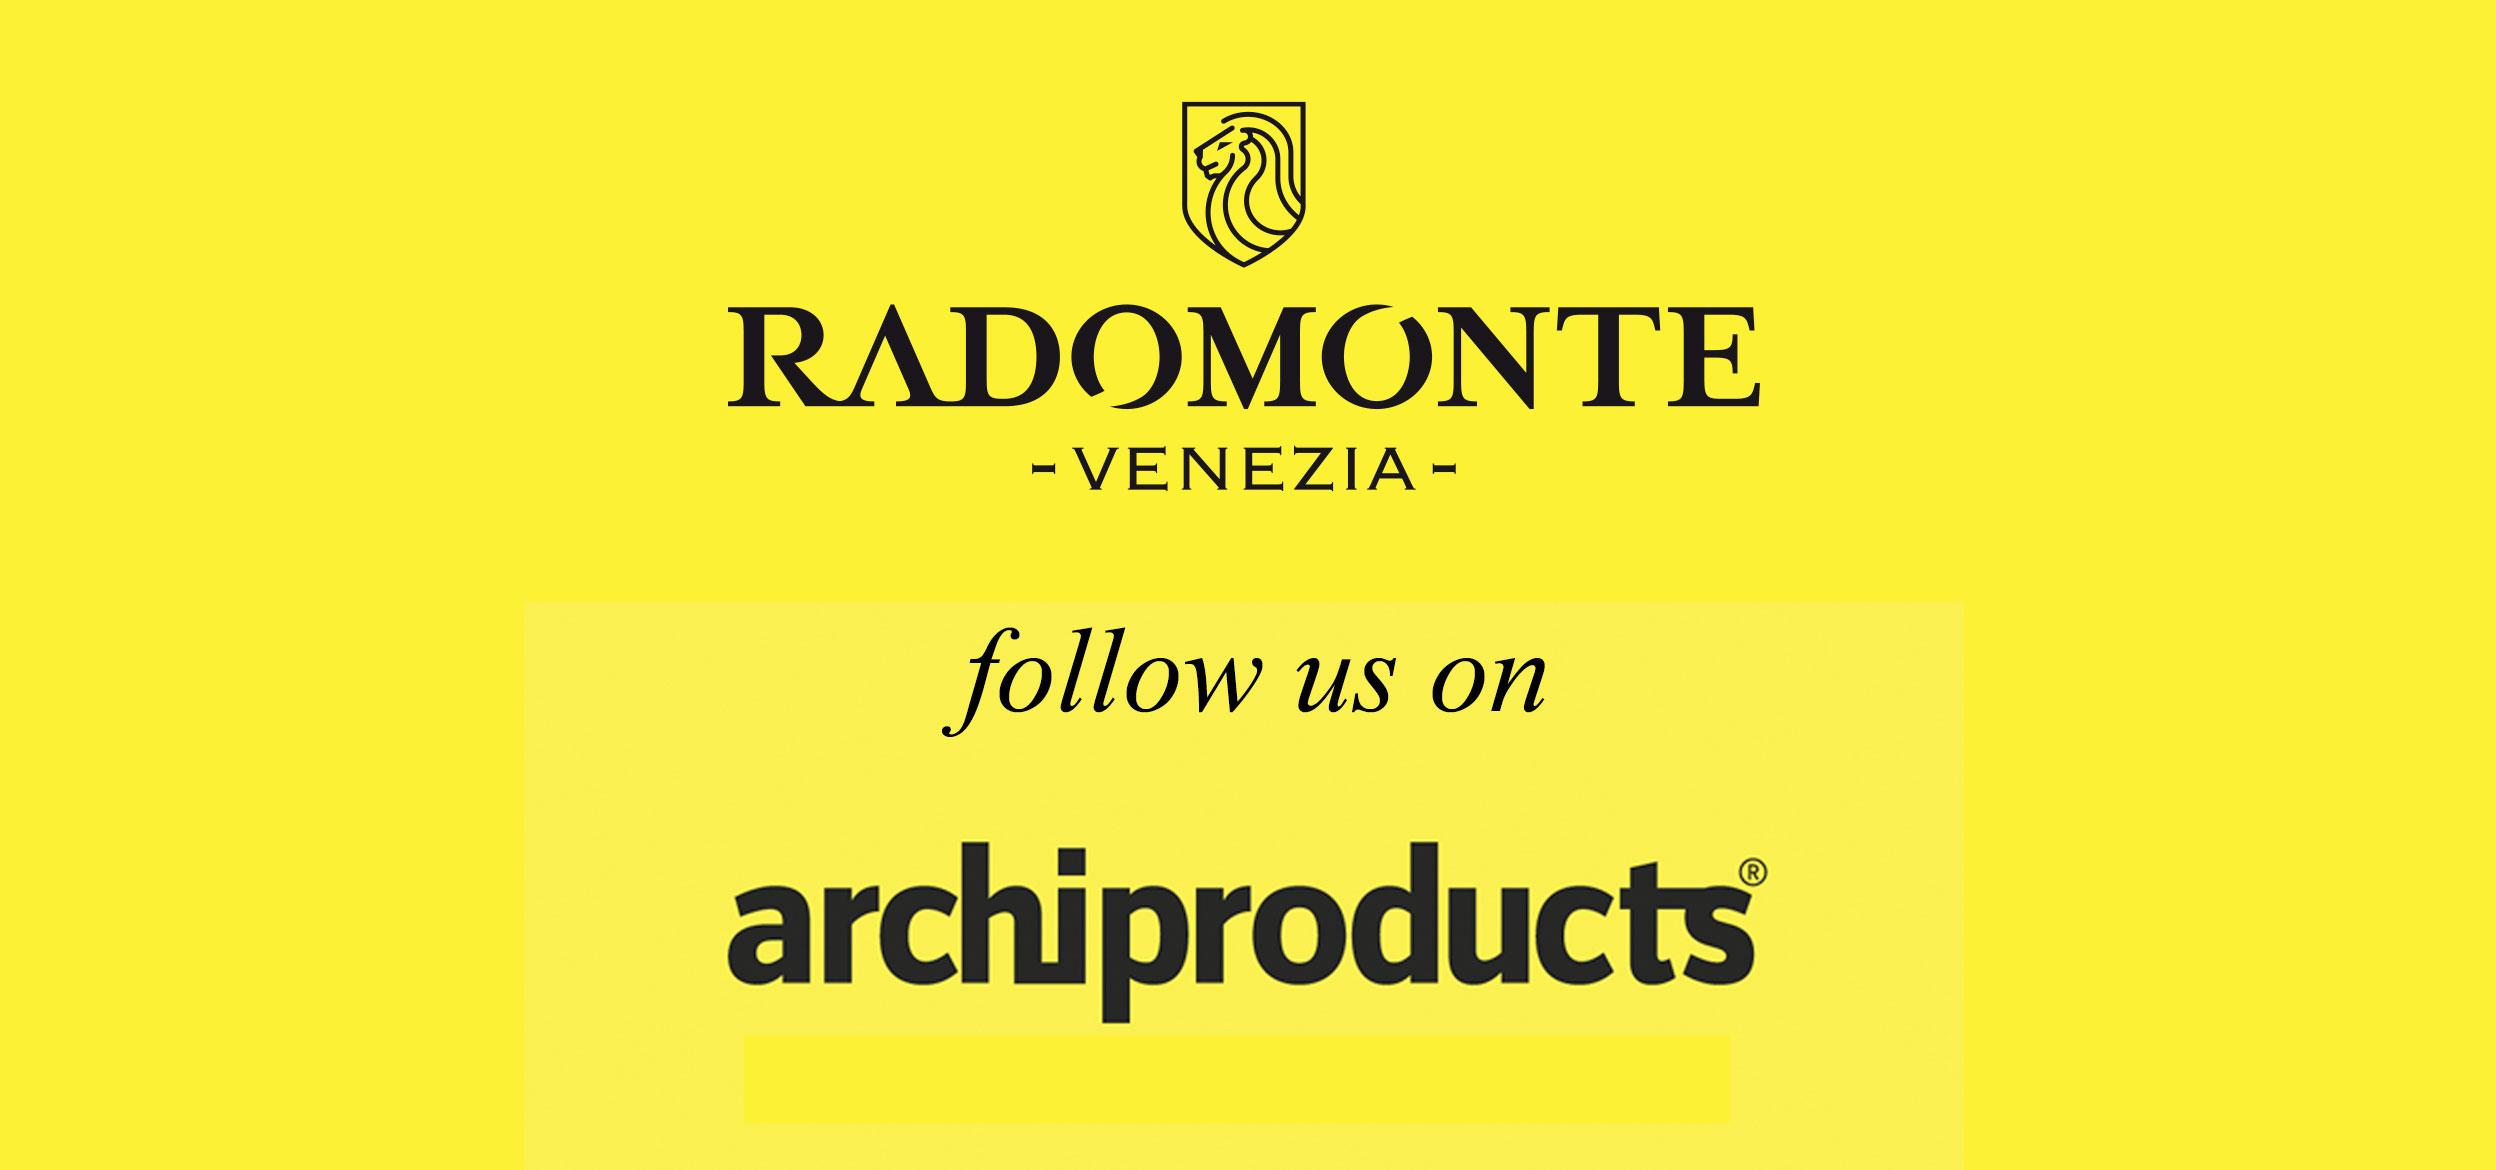 Radomonte, now on Archiproducts